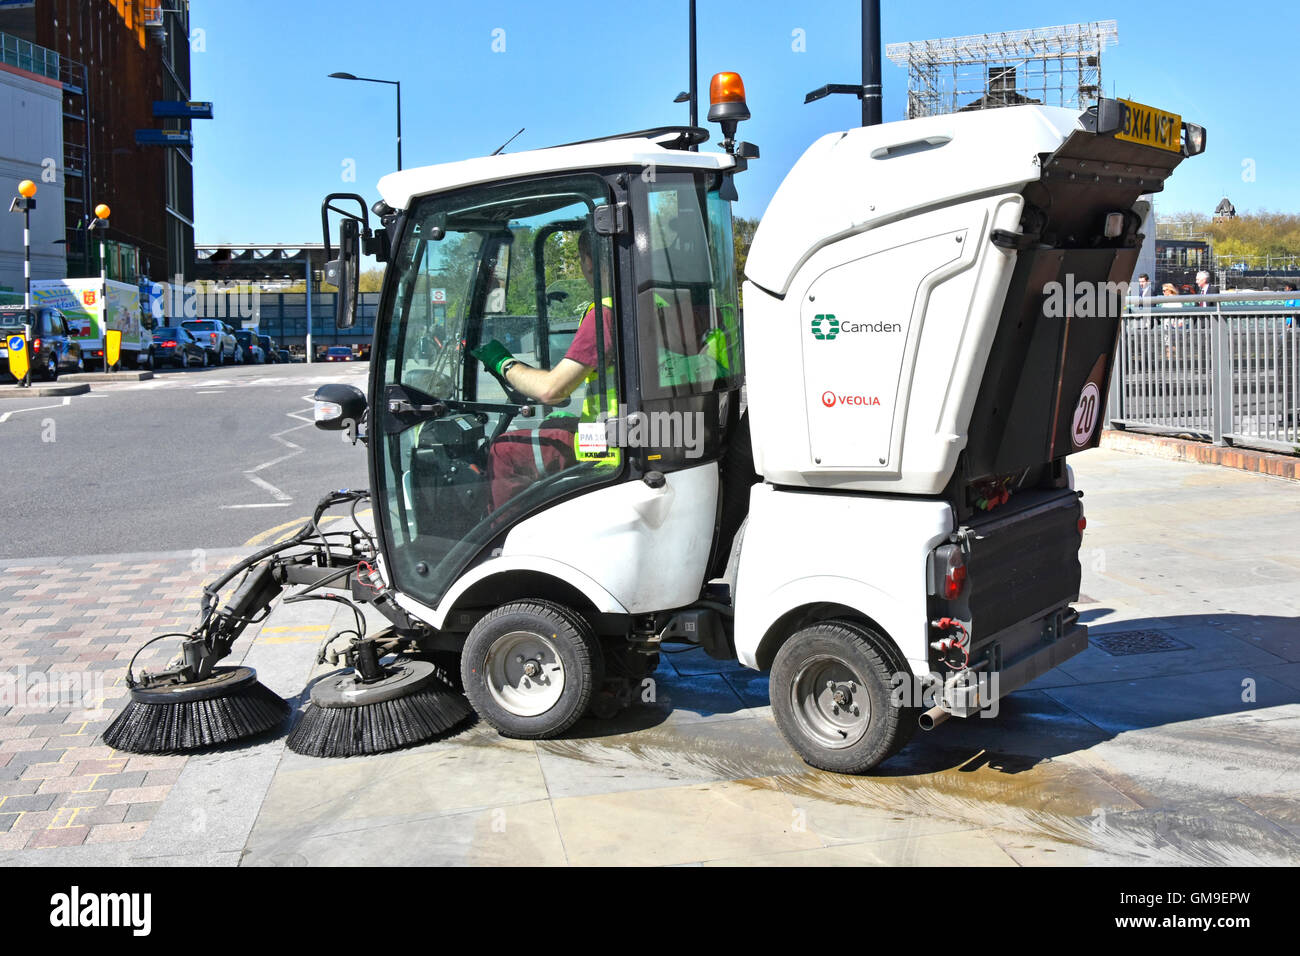 London Borough of Camden England UK local council street cleaning by compact mechanical road & pavement sweeper machine in use and operated by Veolia Stock Photo